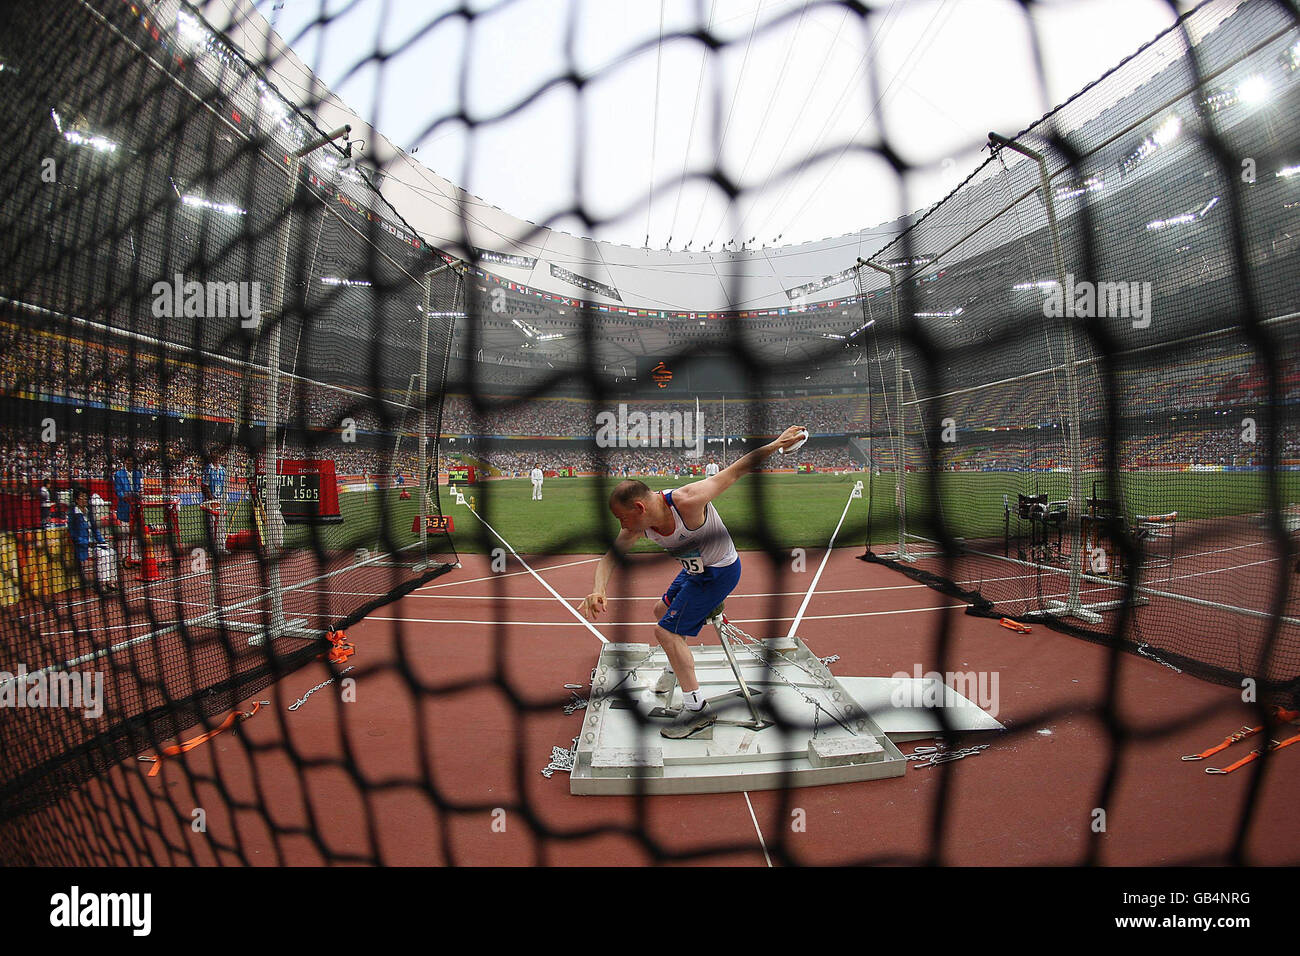 Great Britain's Chris Martin competes in the men's Discus f33 final at the Beijing Paralympic Games 2008 at the Beijing National Stadium, China. Stock Photo